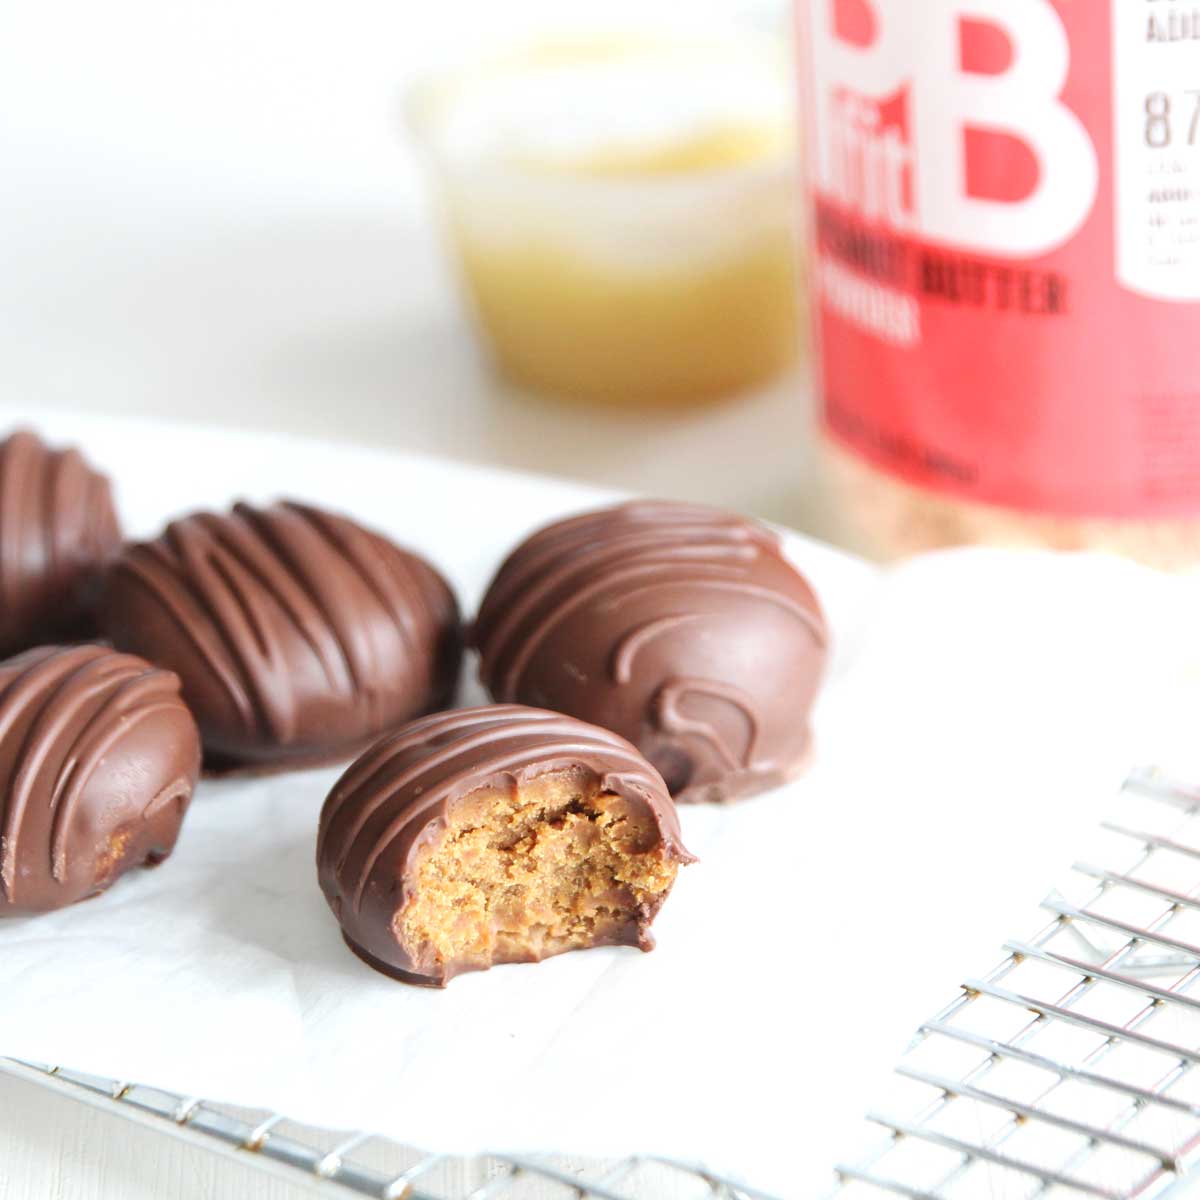 Easy 3 Ingredient PB Fit Peanut Butter Easter Eggs Recipe